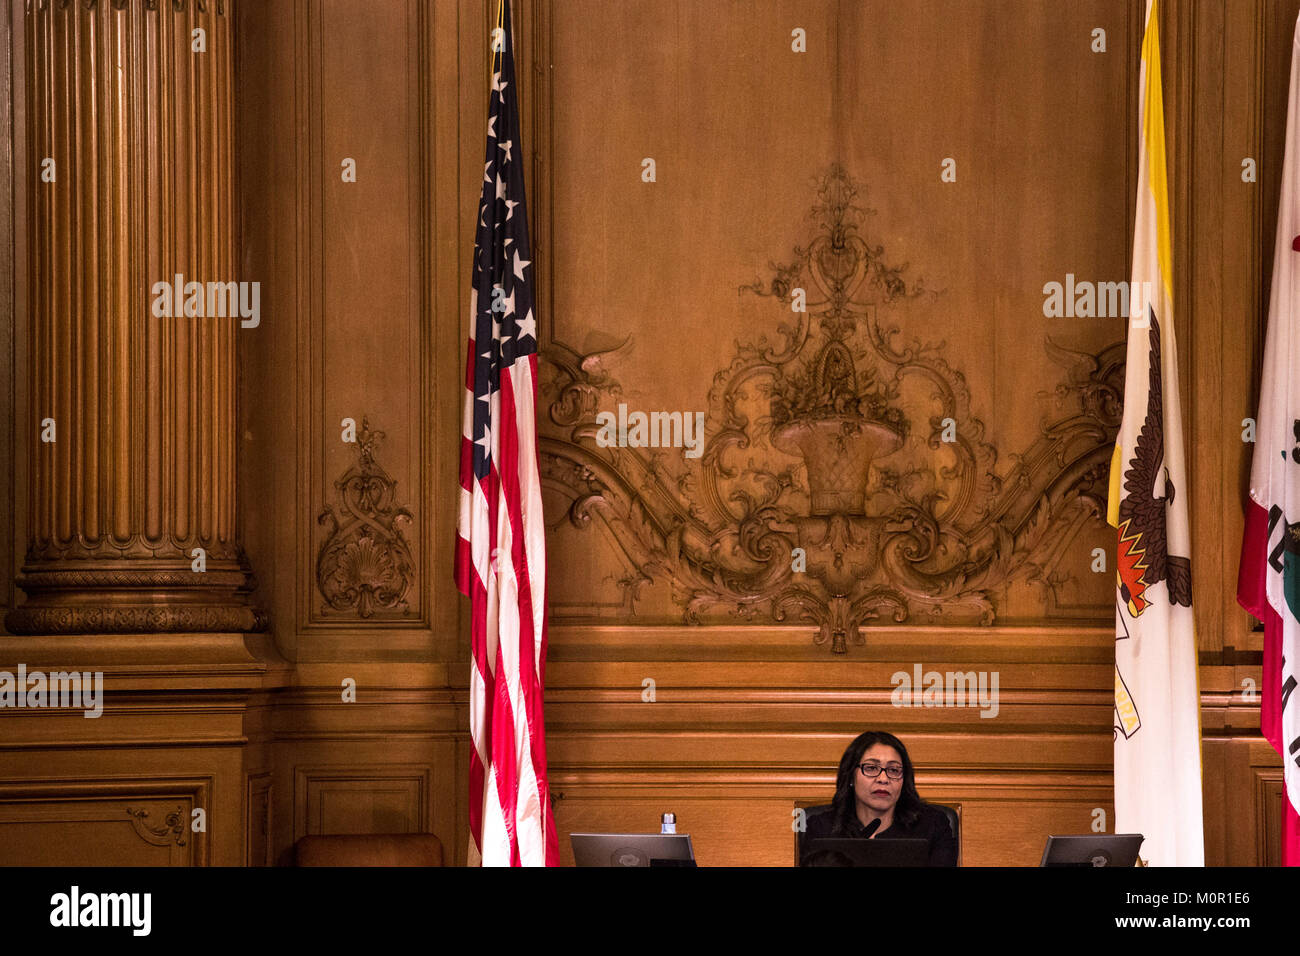 San Francisco, California, USA. 23rd Jan, 2018. Board of Supervisors President London Breed, who became acting mayor following the death of Mayor Edwin Lee, listens to public comment regarding the process of selecting an interim mayor during a Board of Supervisors meeting at City Hall in San Francisco, California. Late San Francisco Mayor Lee, 65, died of a heart attack on Dec. 12, 2017. Credit: Joel Angel Juarez/ZUMA Wire/Alamy Live News Stock Photo